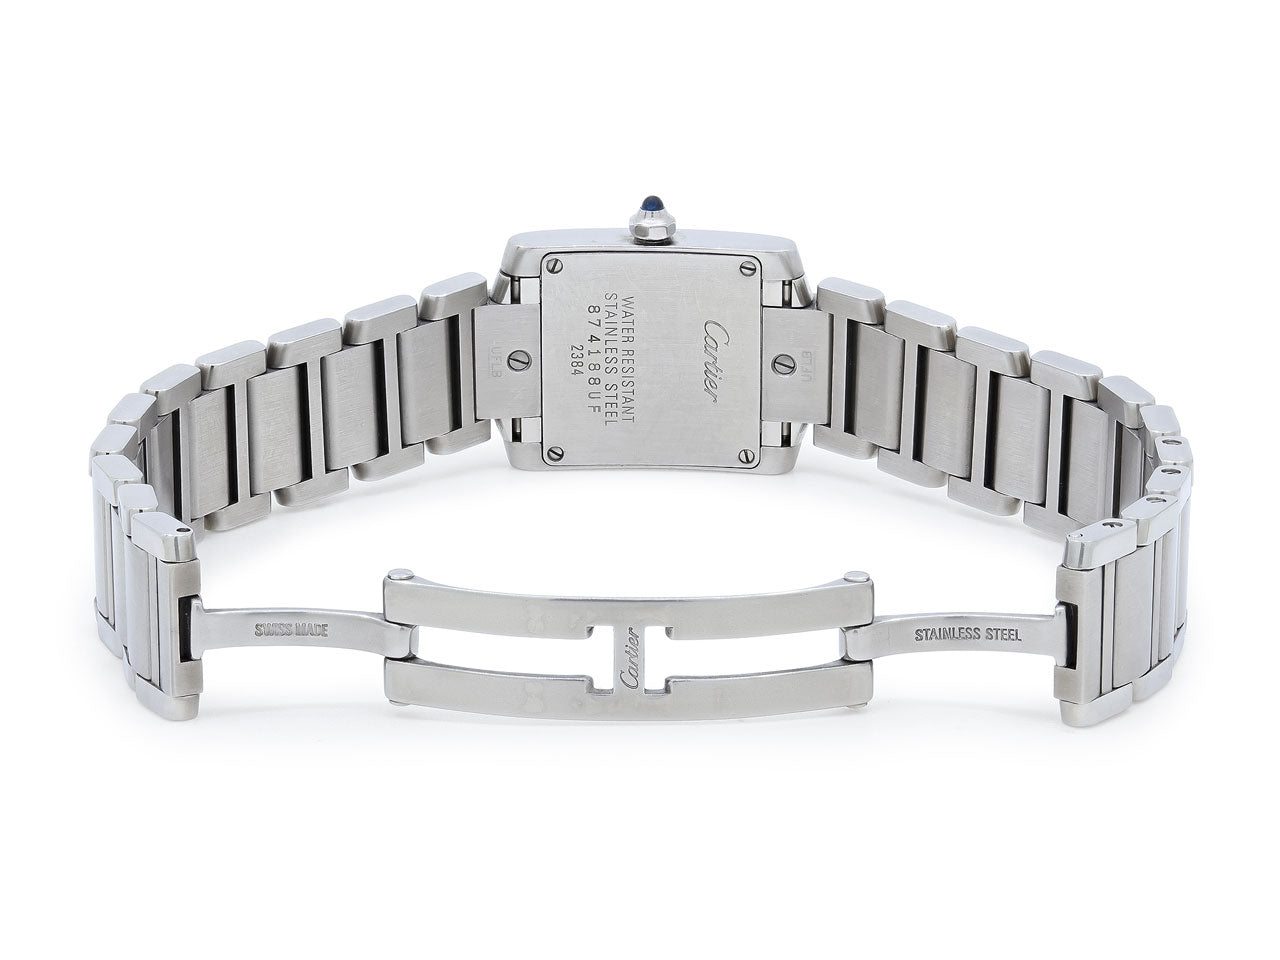 Cartier 'Tank Française' Watch in Stainless Steel